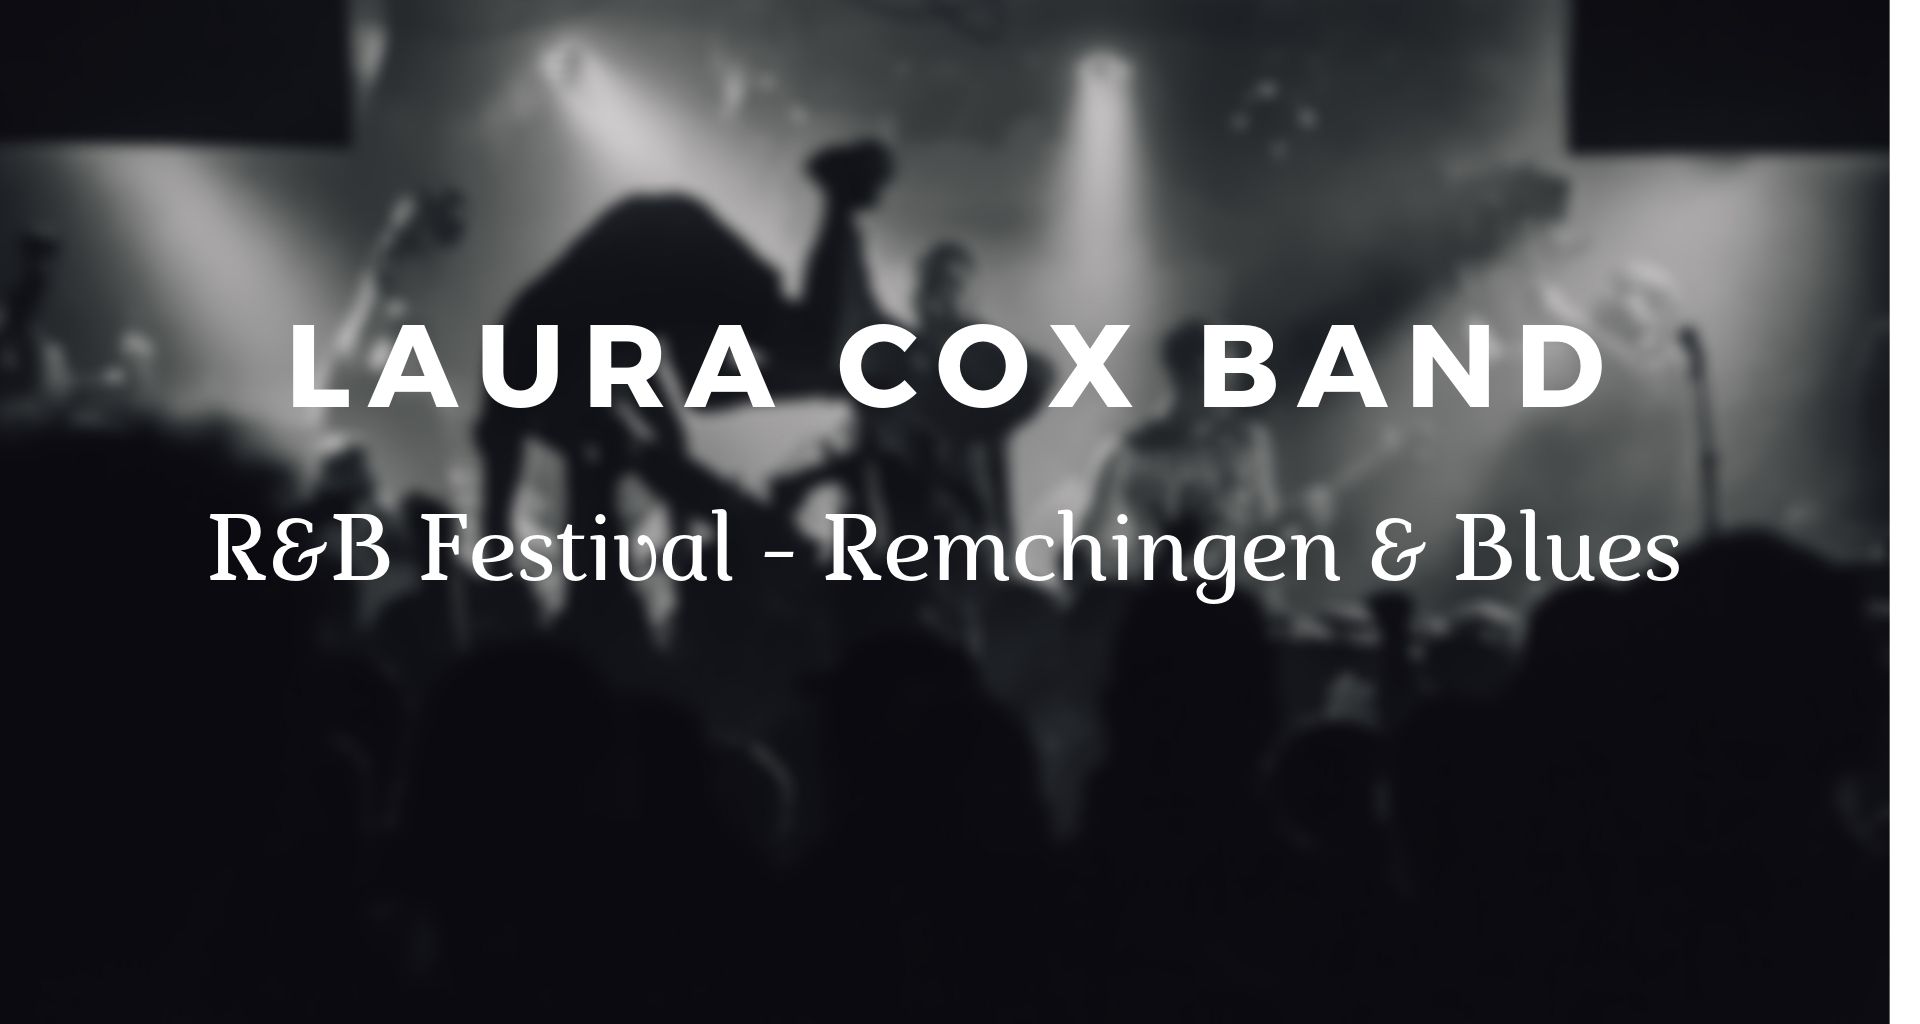 Top Event - Laura Cox Band